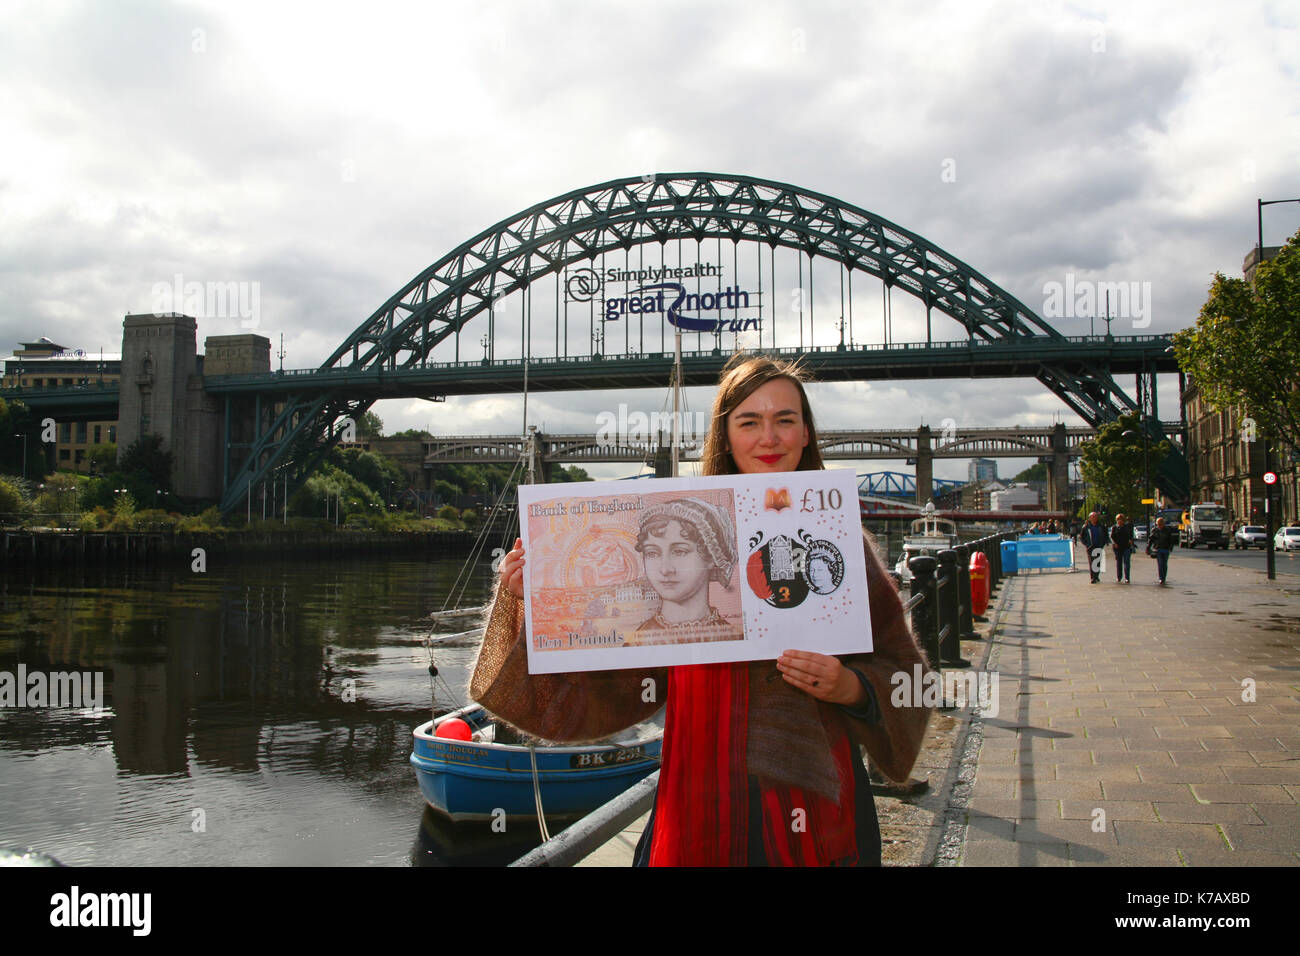 Jane Austen New Ten Pound note launched in UK, Newcastle upon Tyne. Stock Photo